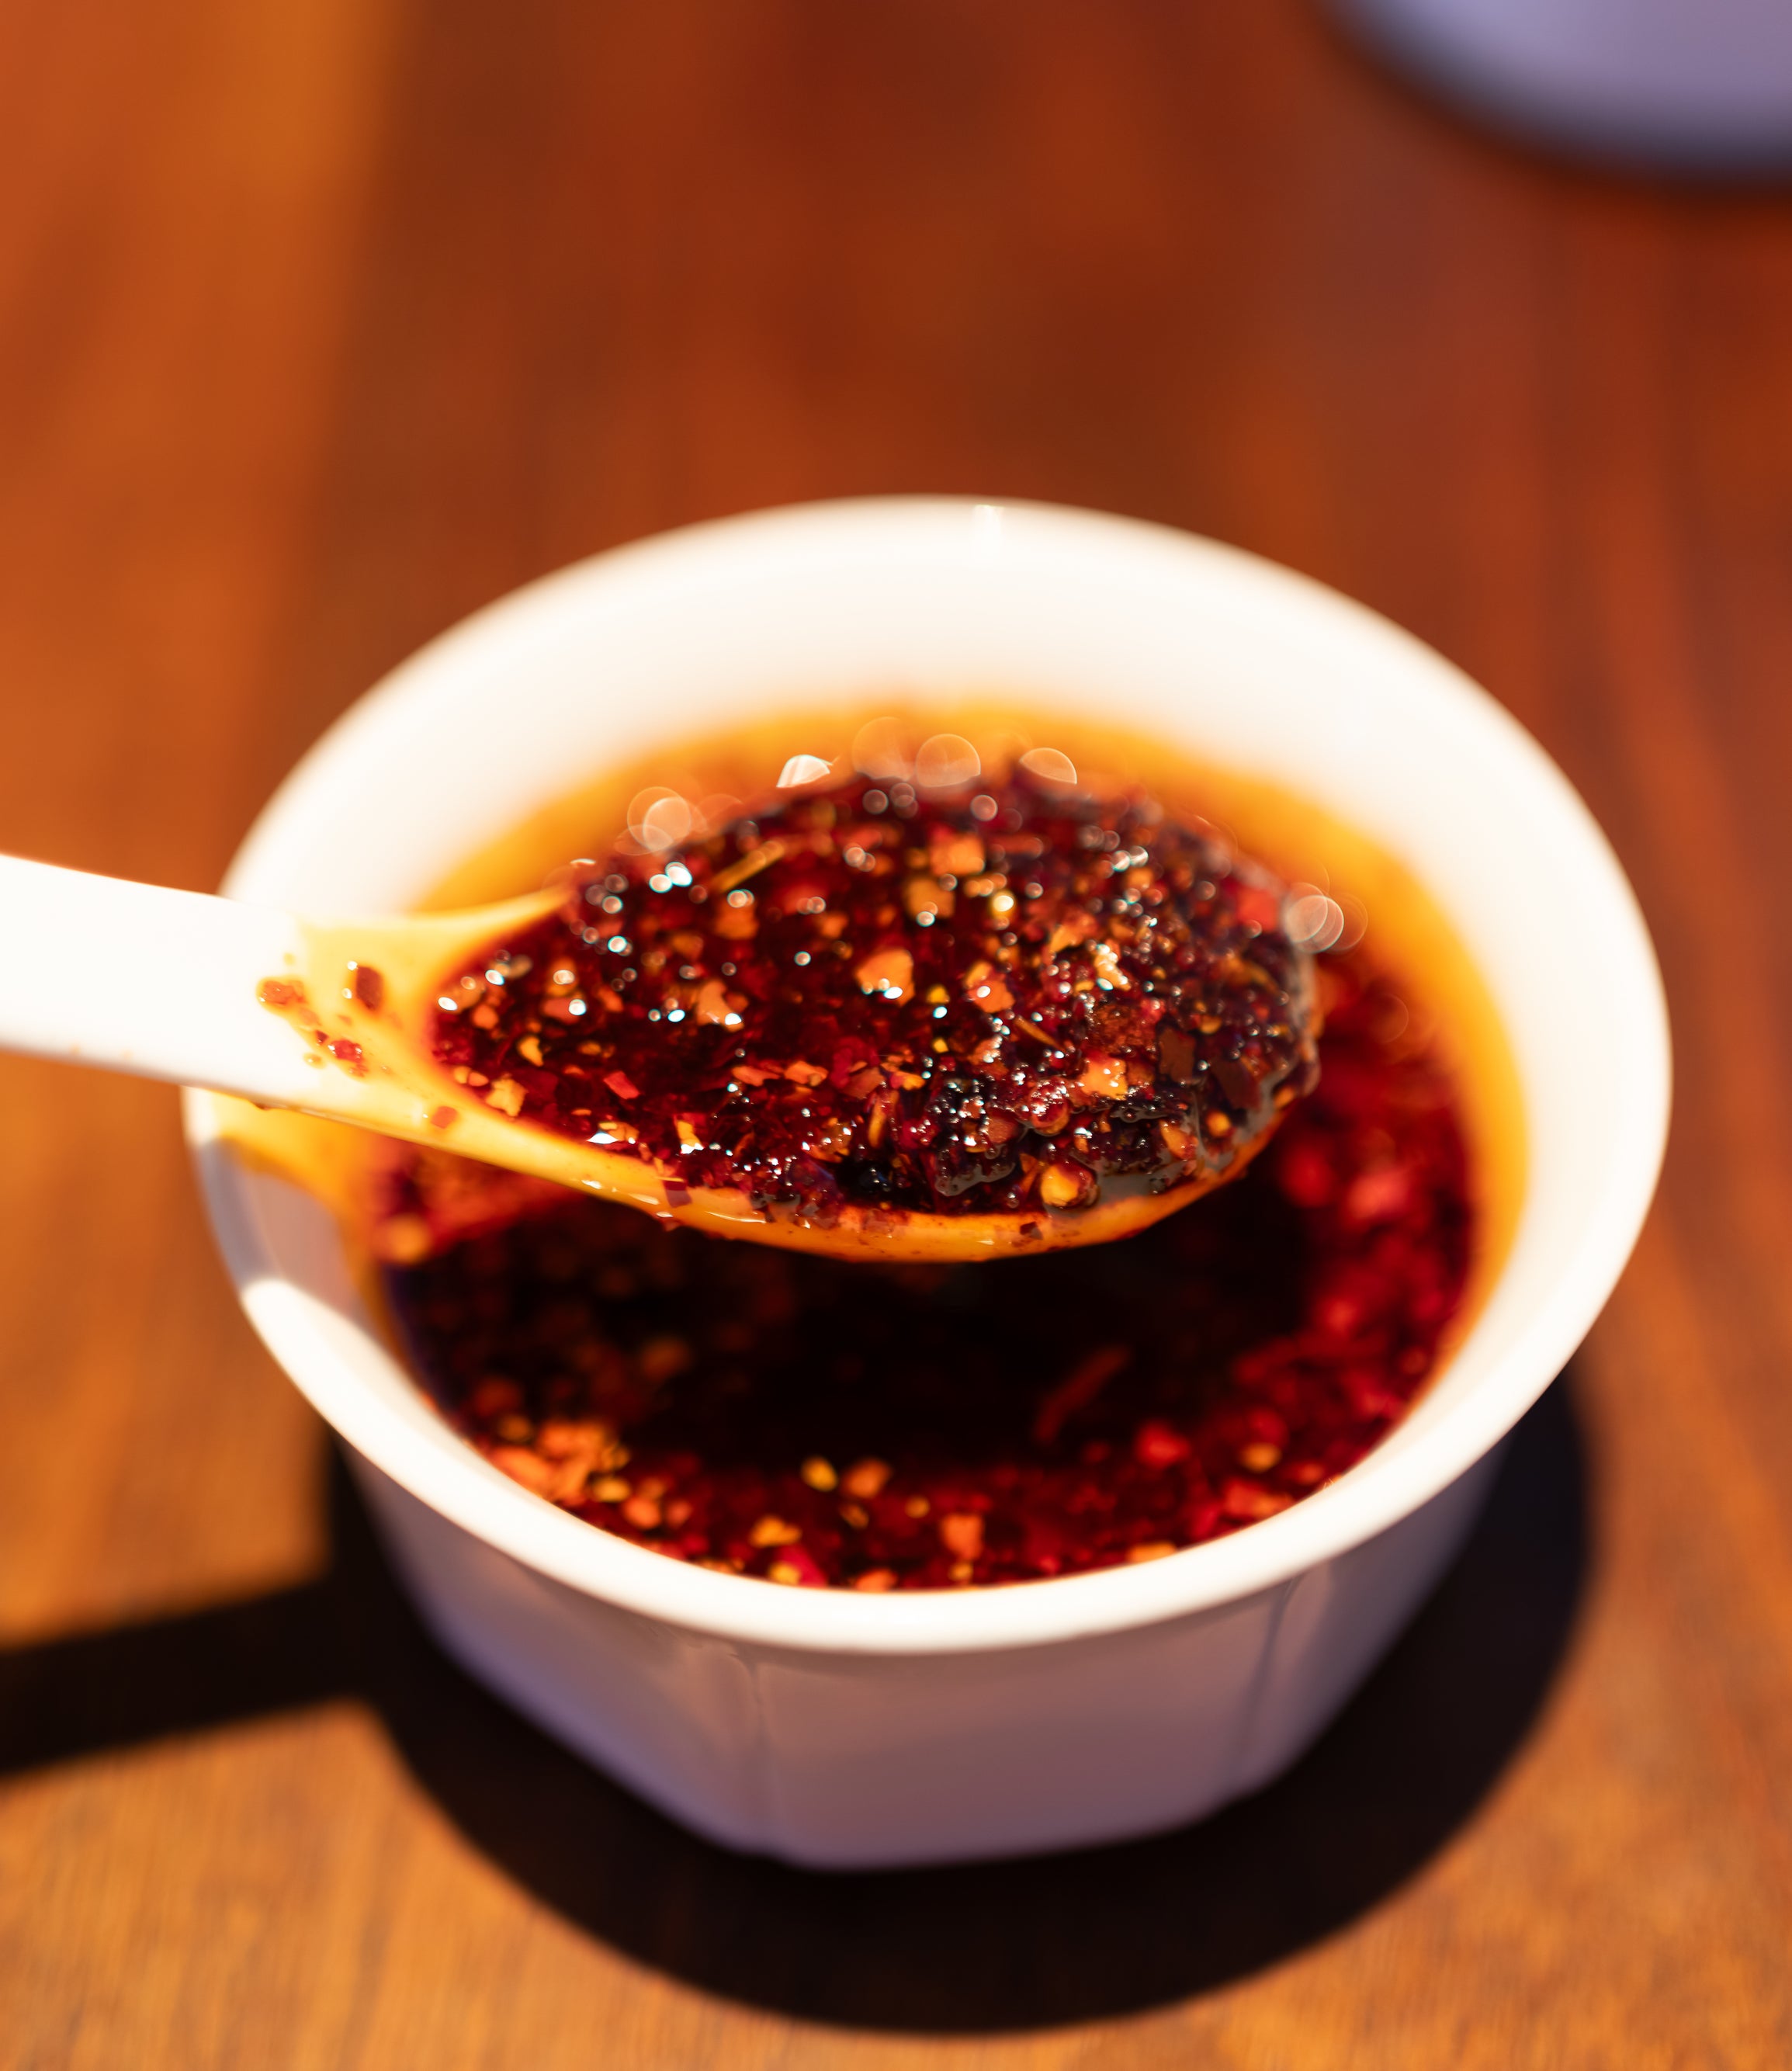 A spoon lifting chili oil with pepper flakes from a small bowl